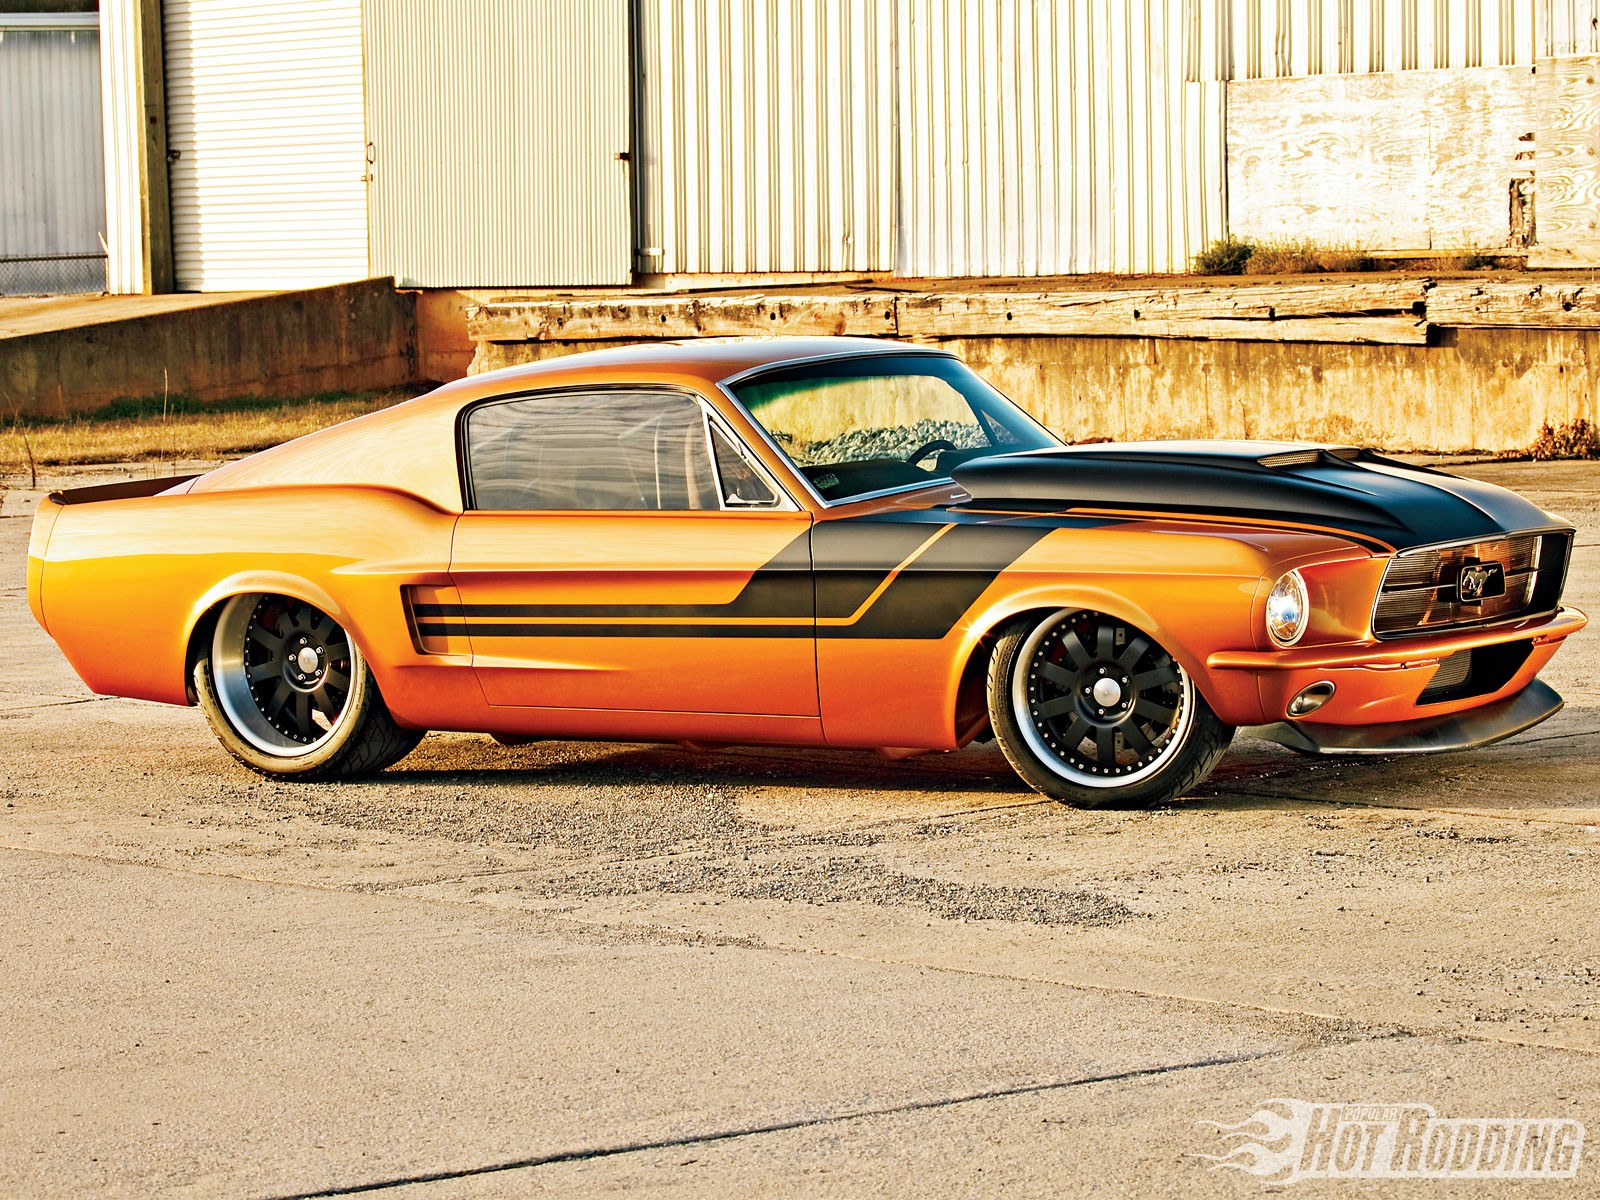 General 1600x1200 car Ford vintage classic car Ford Mustang vehicle orange cars American cars